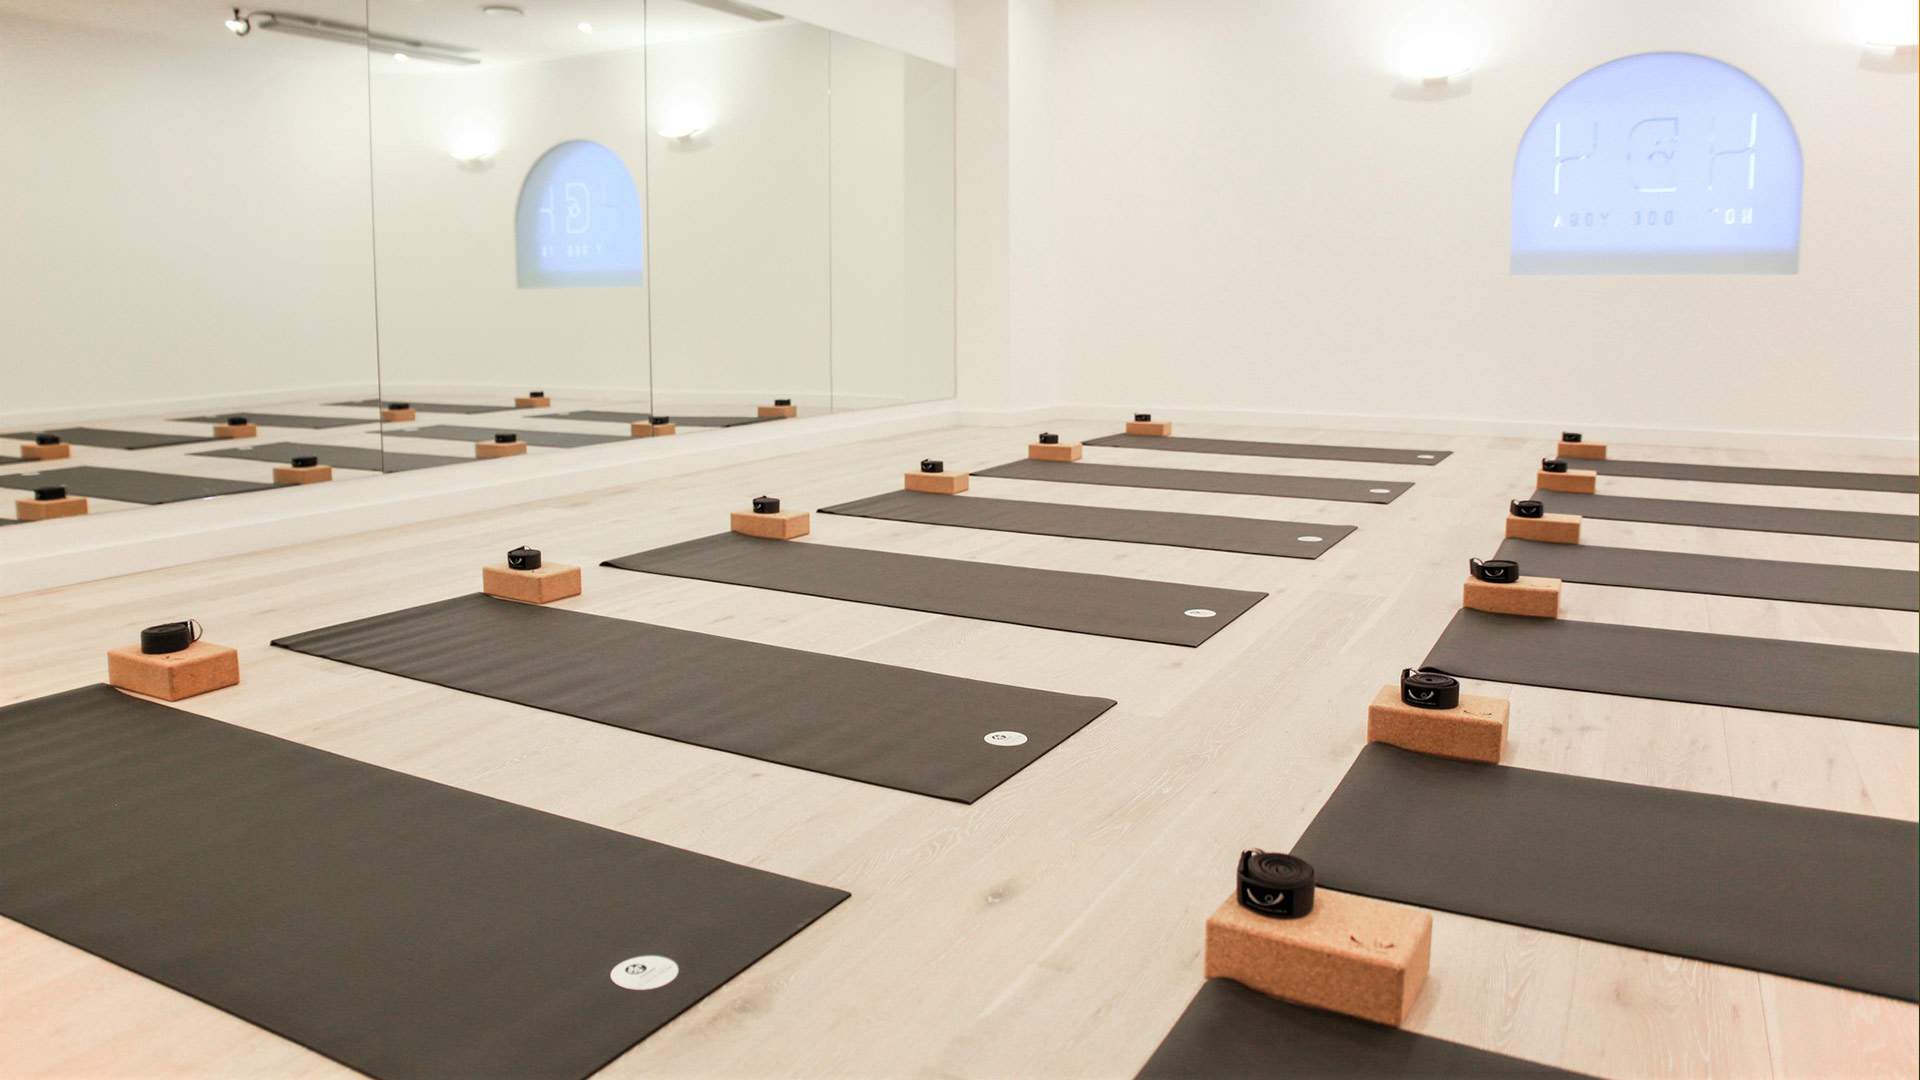 We're Giving Away Three Weeks of Free Yoga at This Dog-Friendly Studio